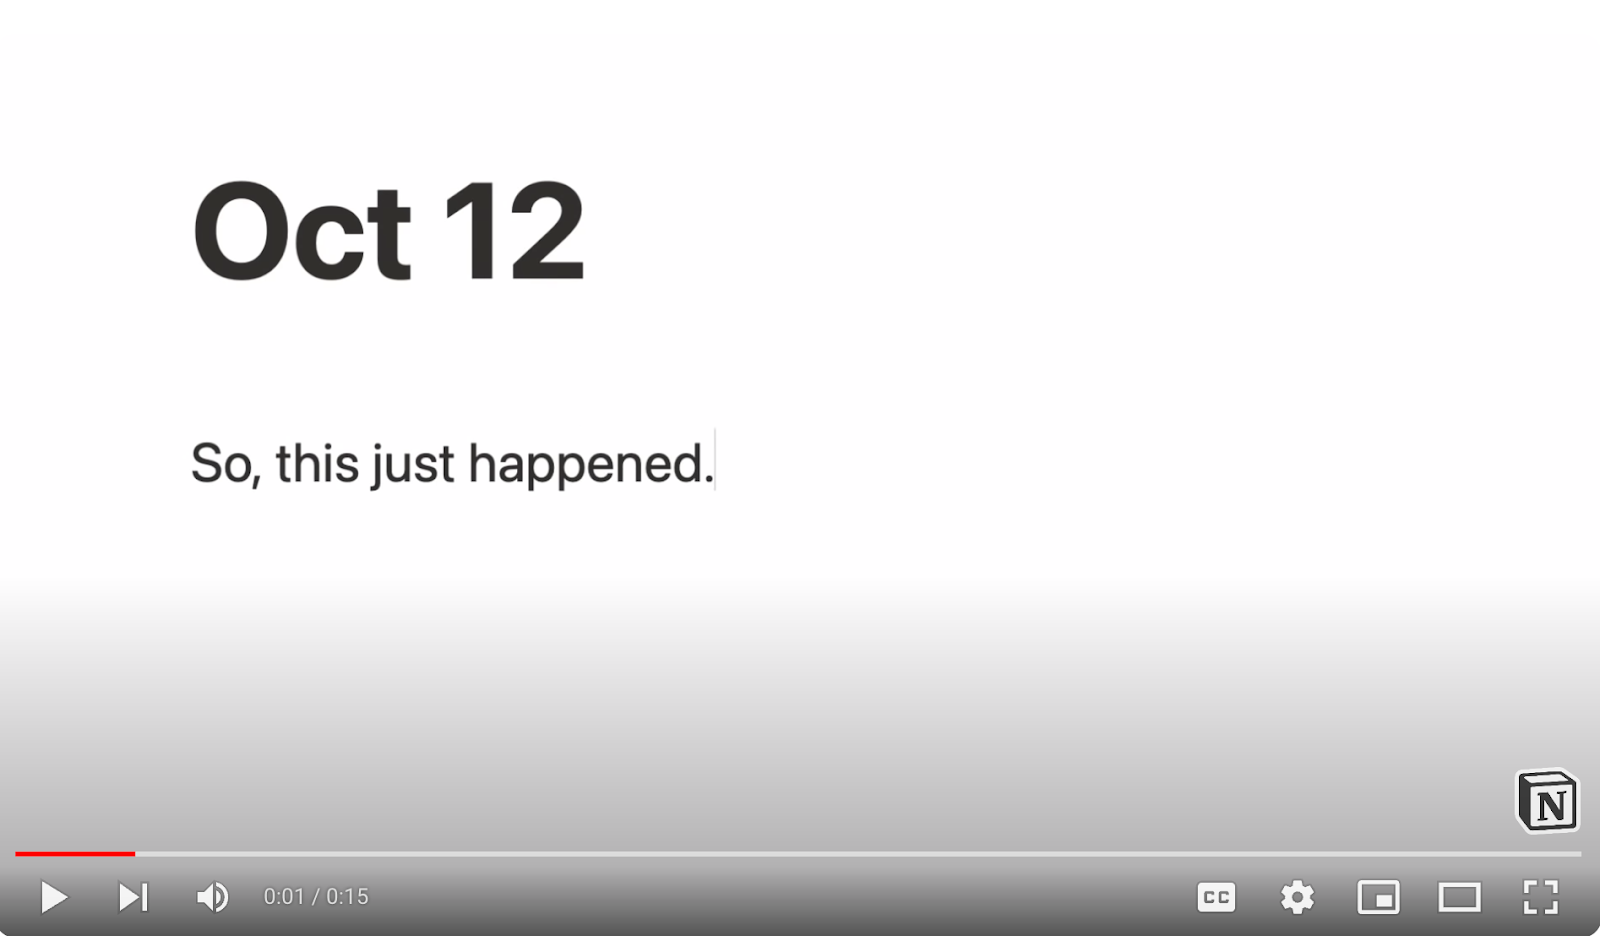 Notion's ad starts with “So this just happened” message